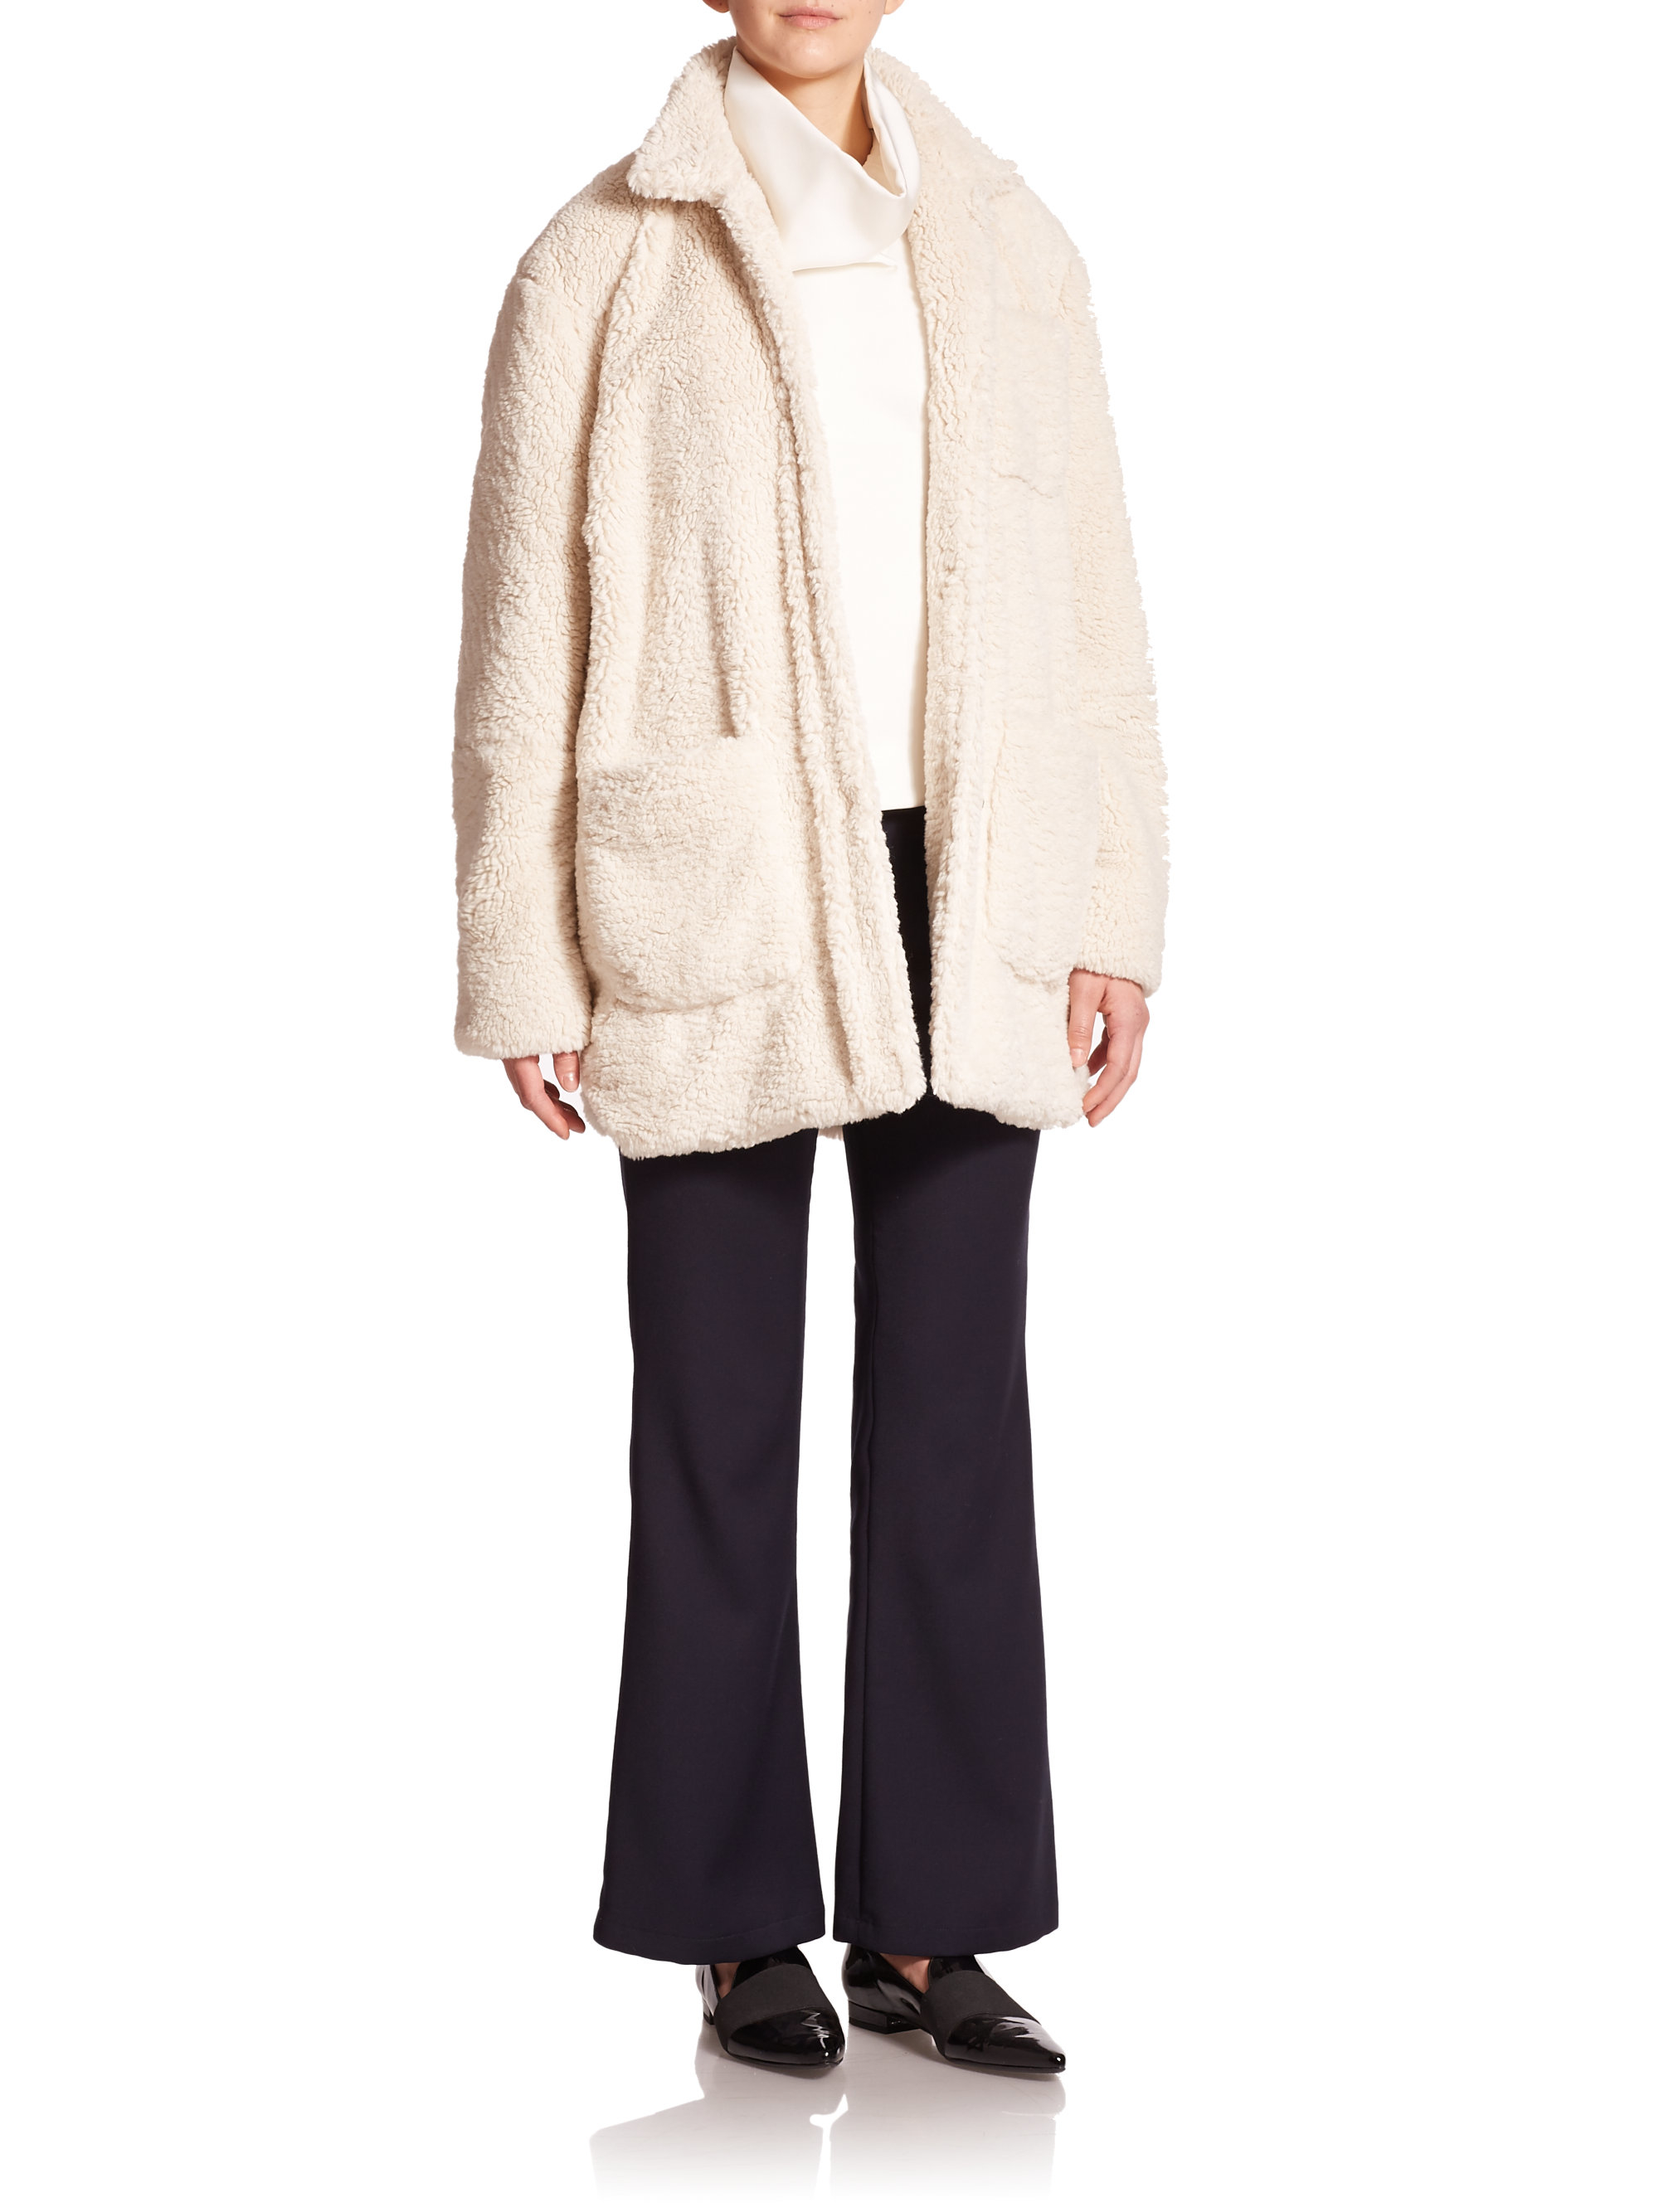 Opening ceremony Bern Oversized Faux Shearling Coat in Natural | Lyst